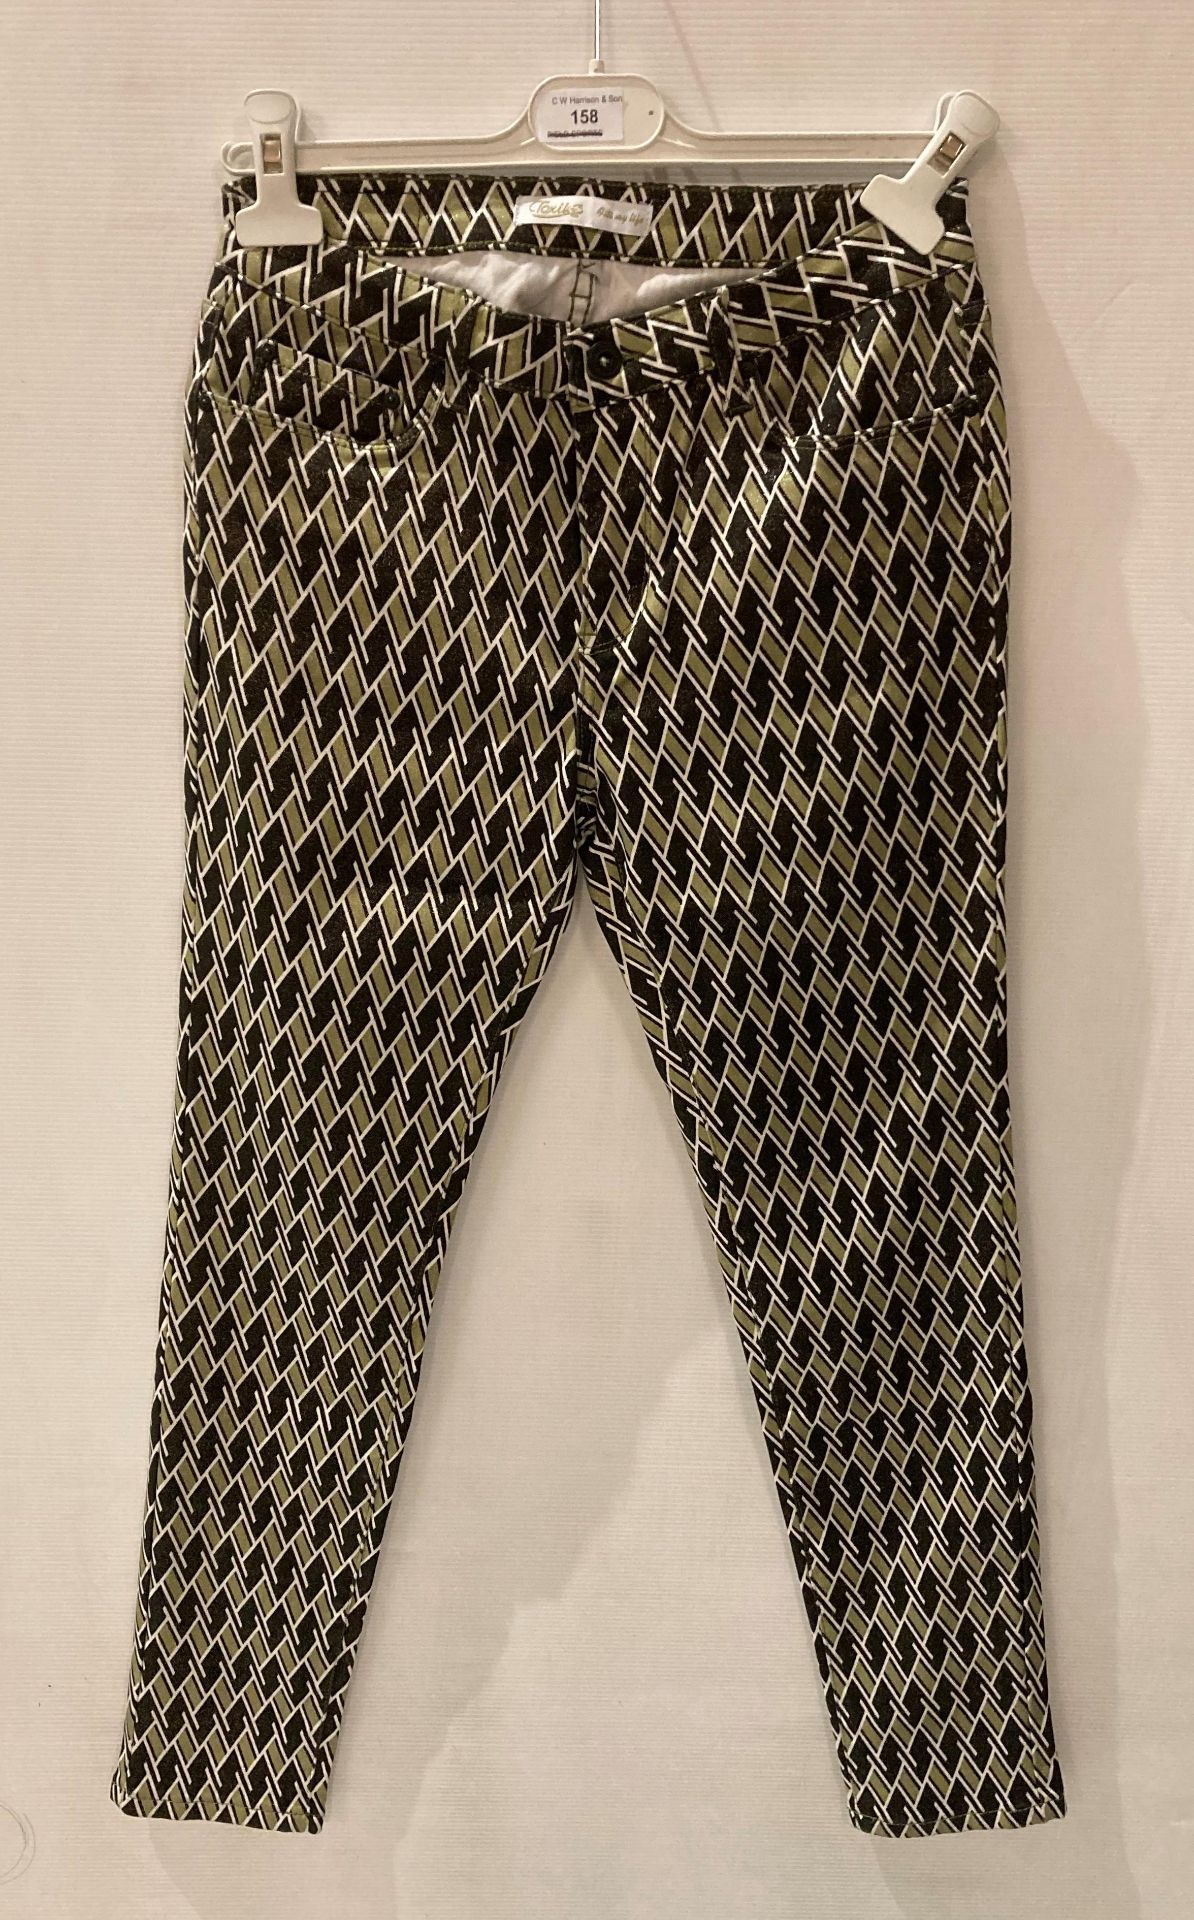 5 x Toxik ladies mosaic print trousers with 2 pockets to front, sizes XS,